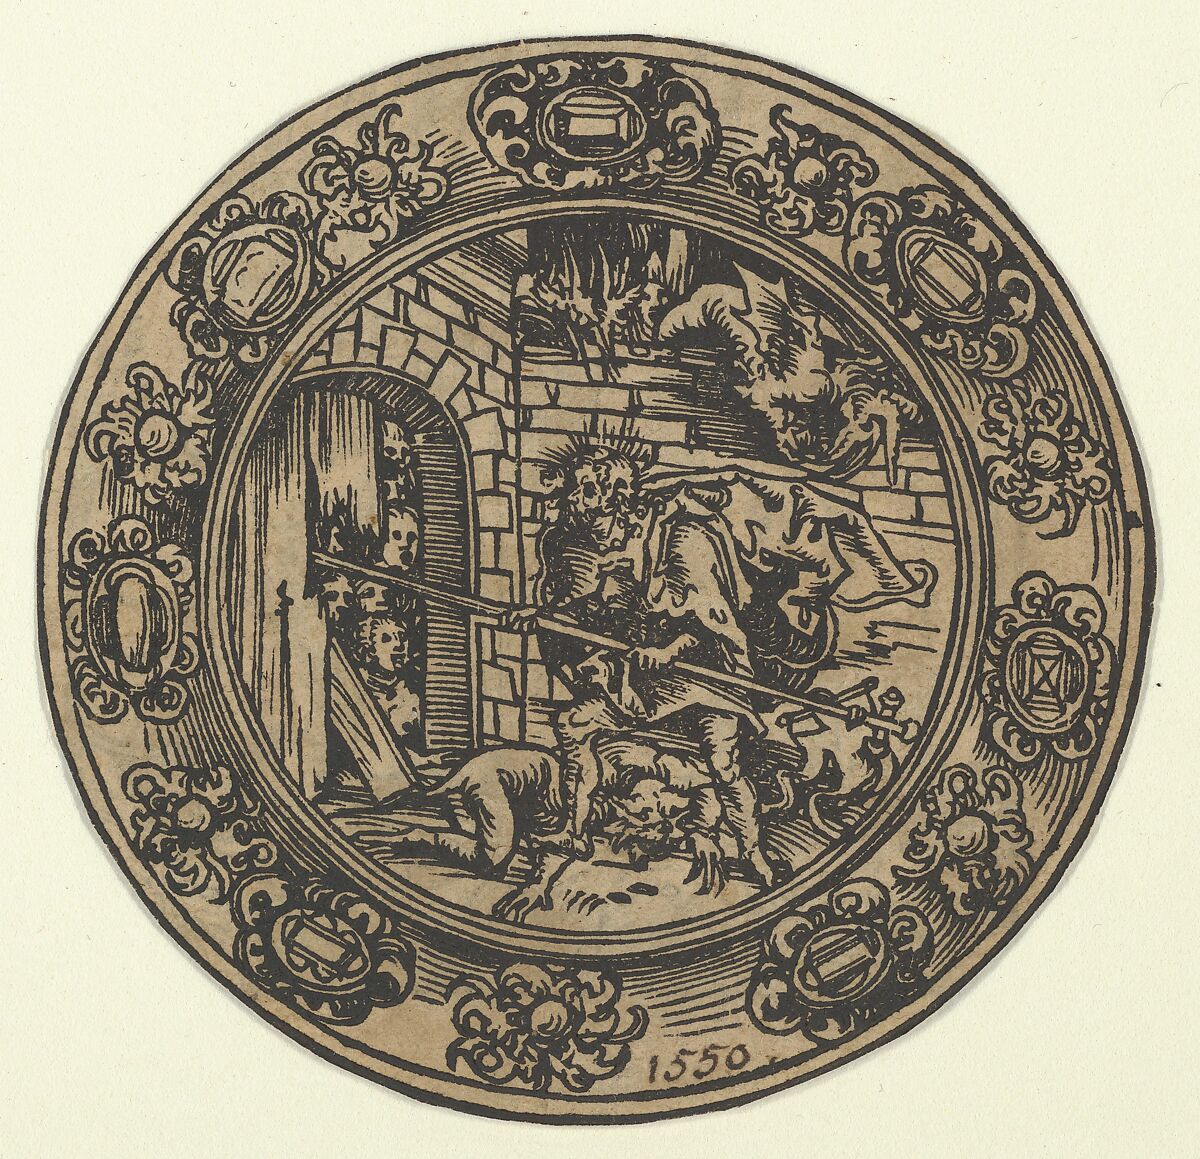 Pacifical-medaillon with Christ in Limbo, Lucas Cranach the Elder (German, Kronach 1472–1553 Weimar), Woodcut; second state of two 